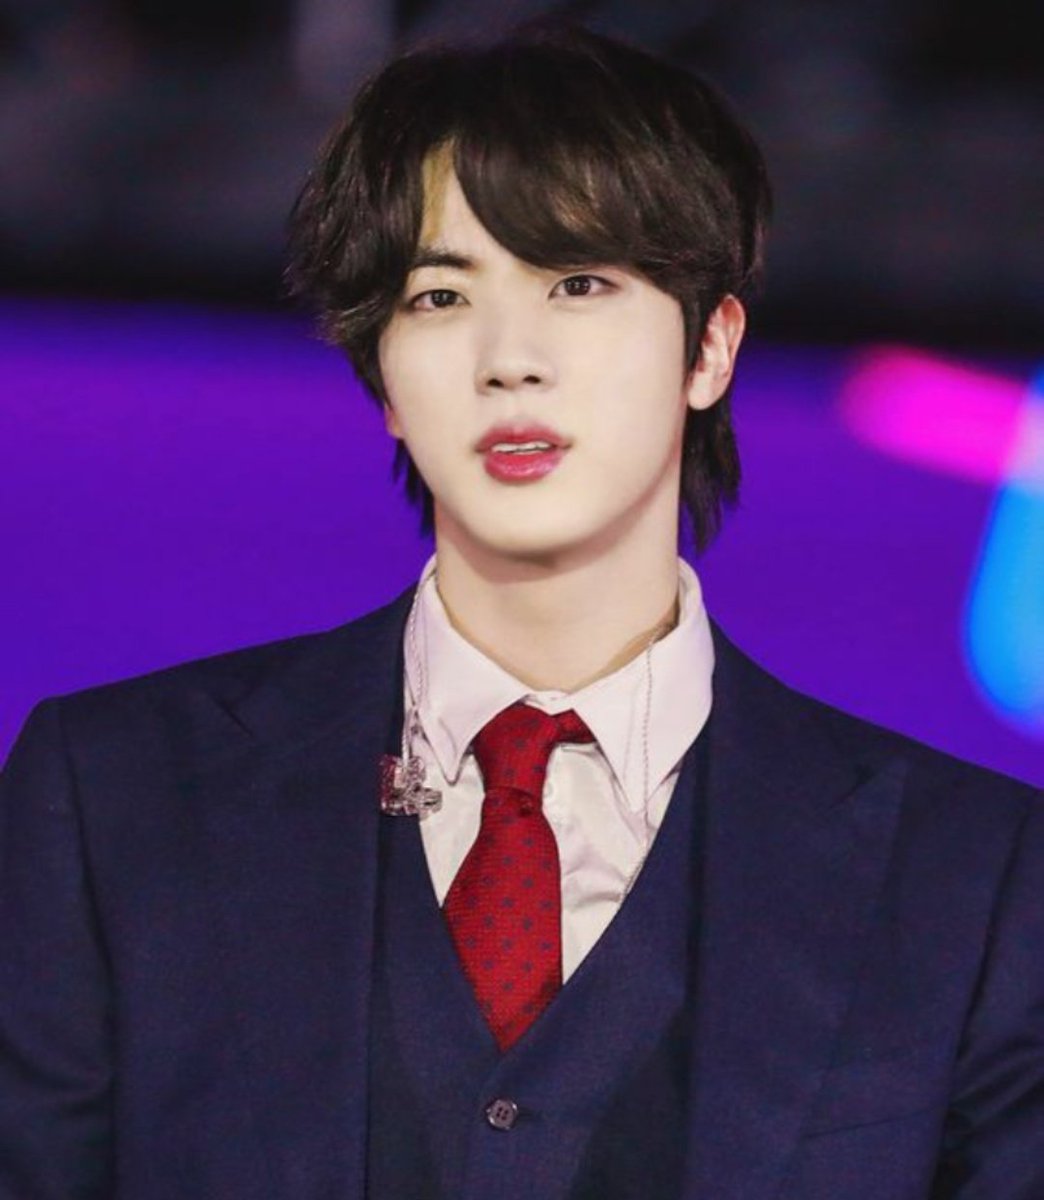 jin's beauty is on another level